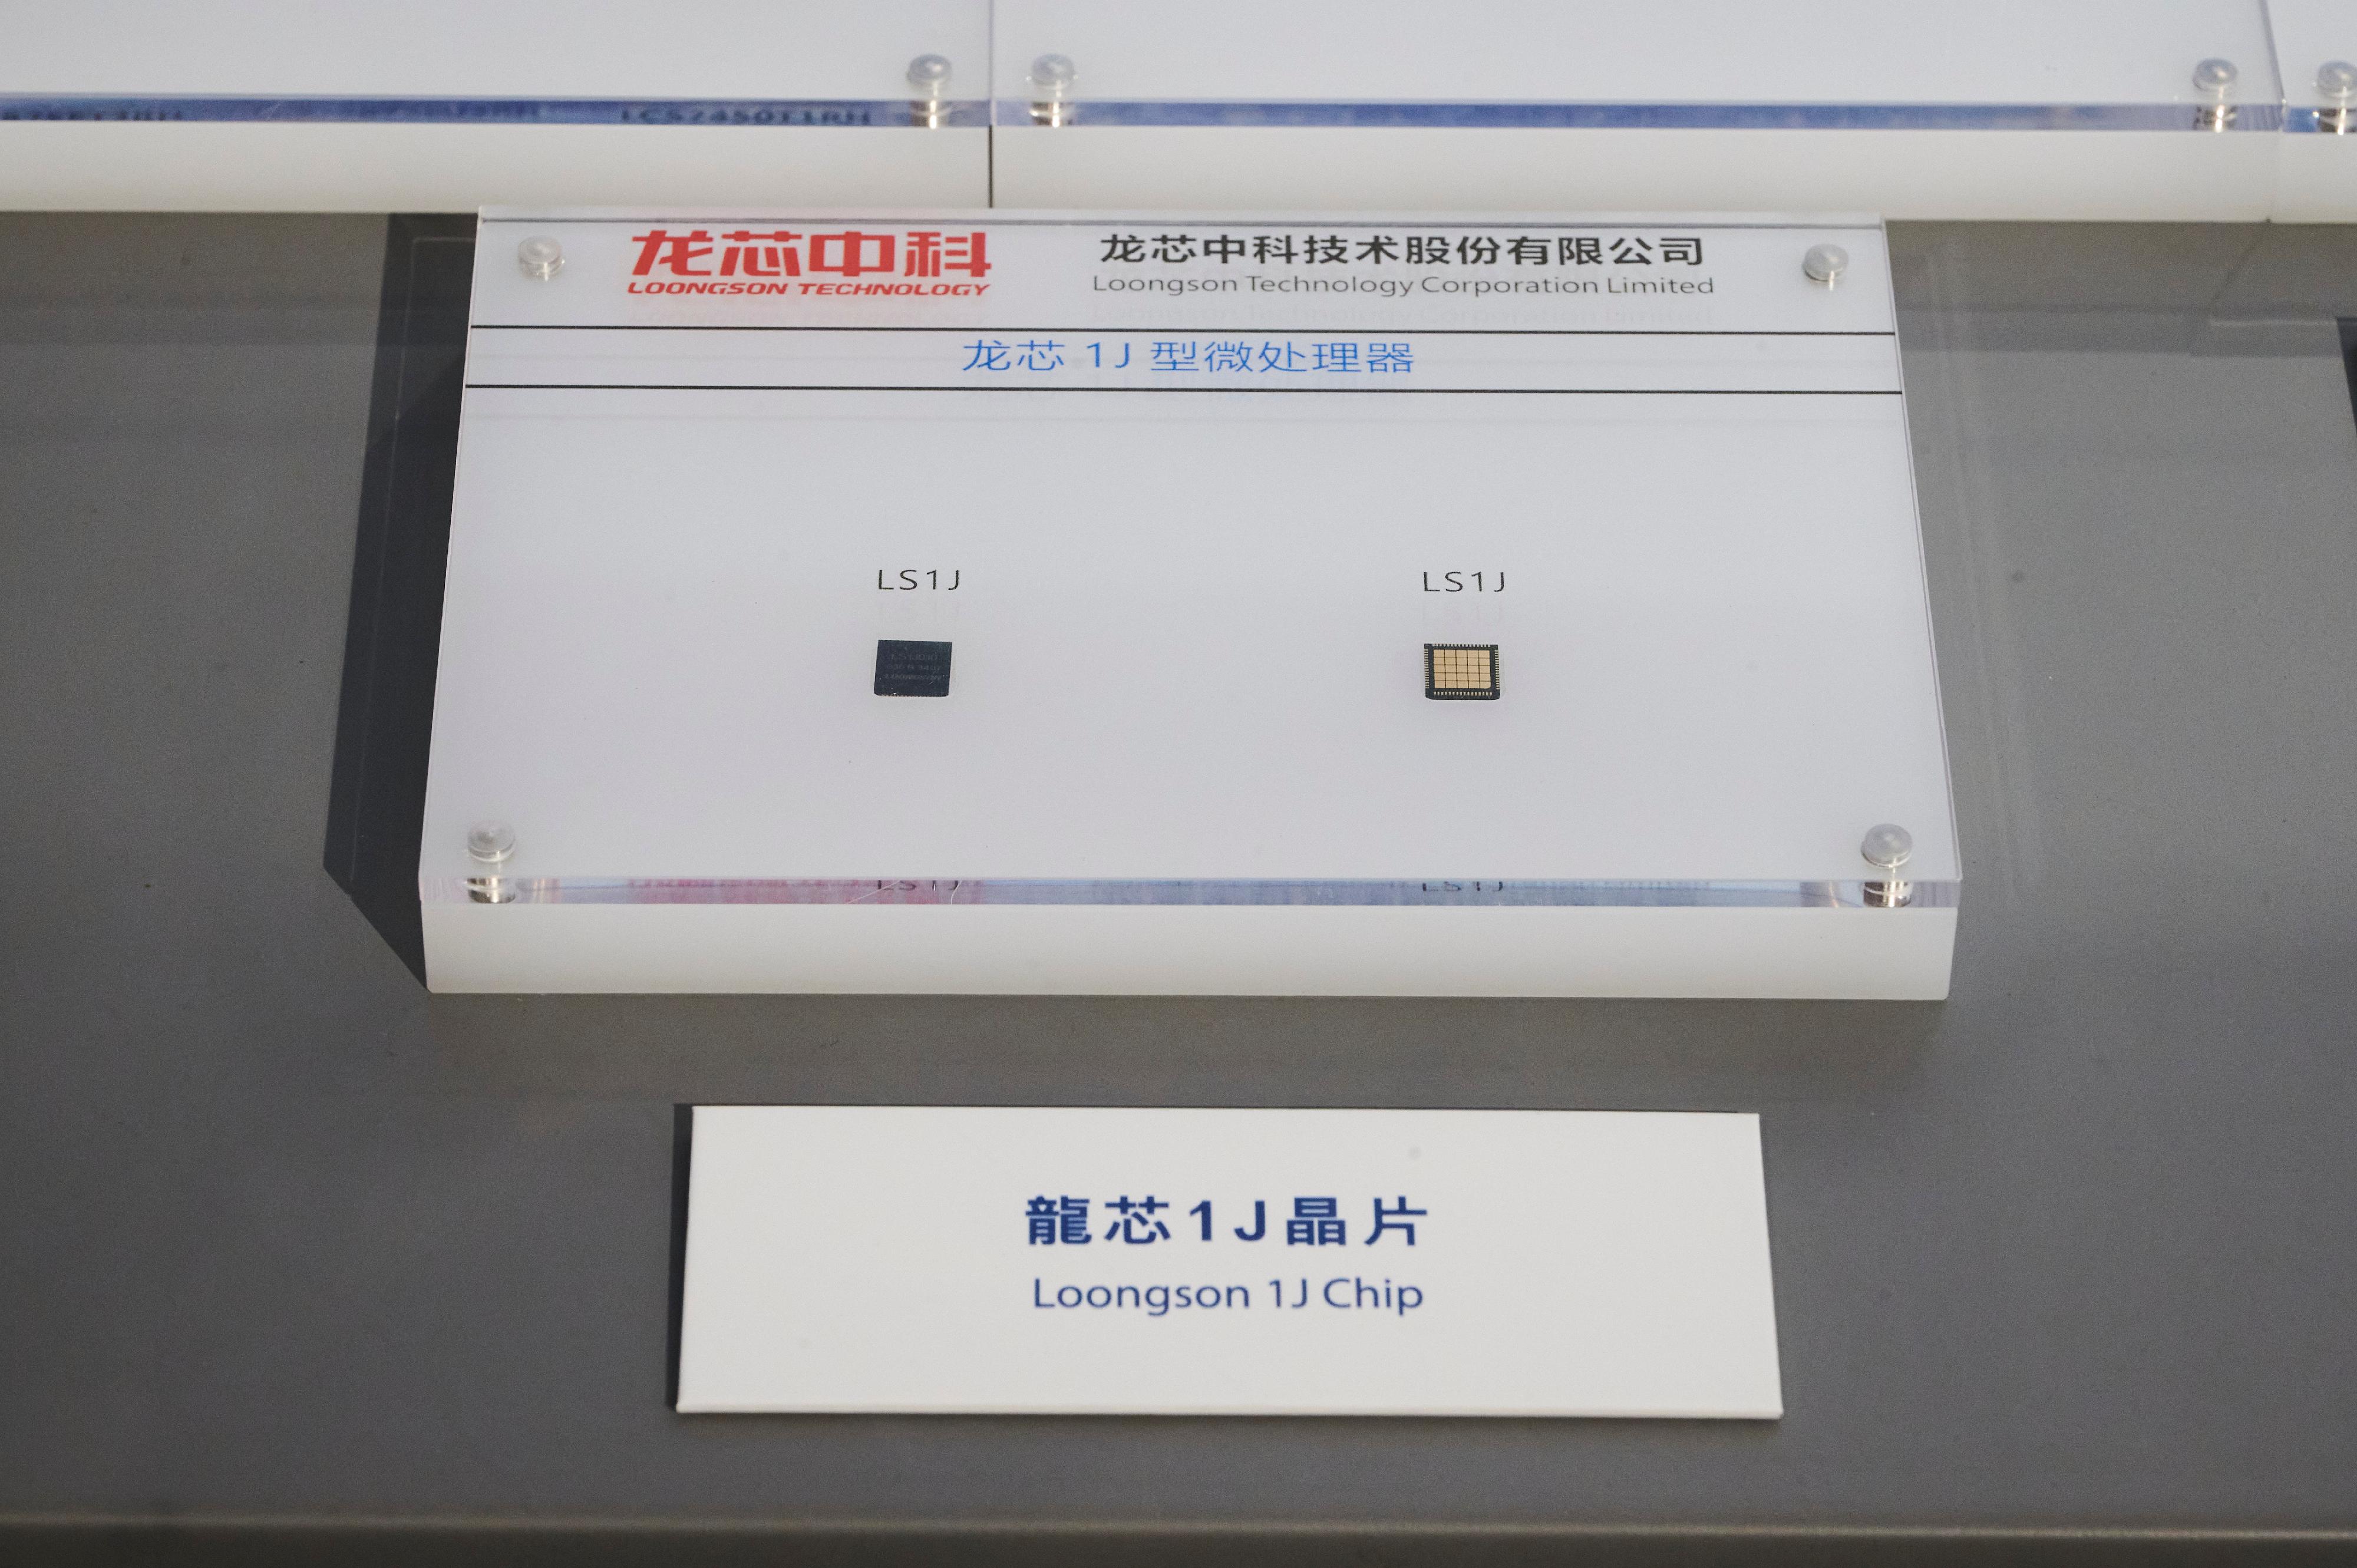 The China Manned Space Exhibition will be held from tomorrow (December 1) to February 18 next year at the Hong Kong Science Museum and the Hong Kong Museum of History. Photo shows a domestic Loongson 1J chip which is widely used in aerospace missions.